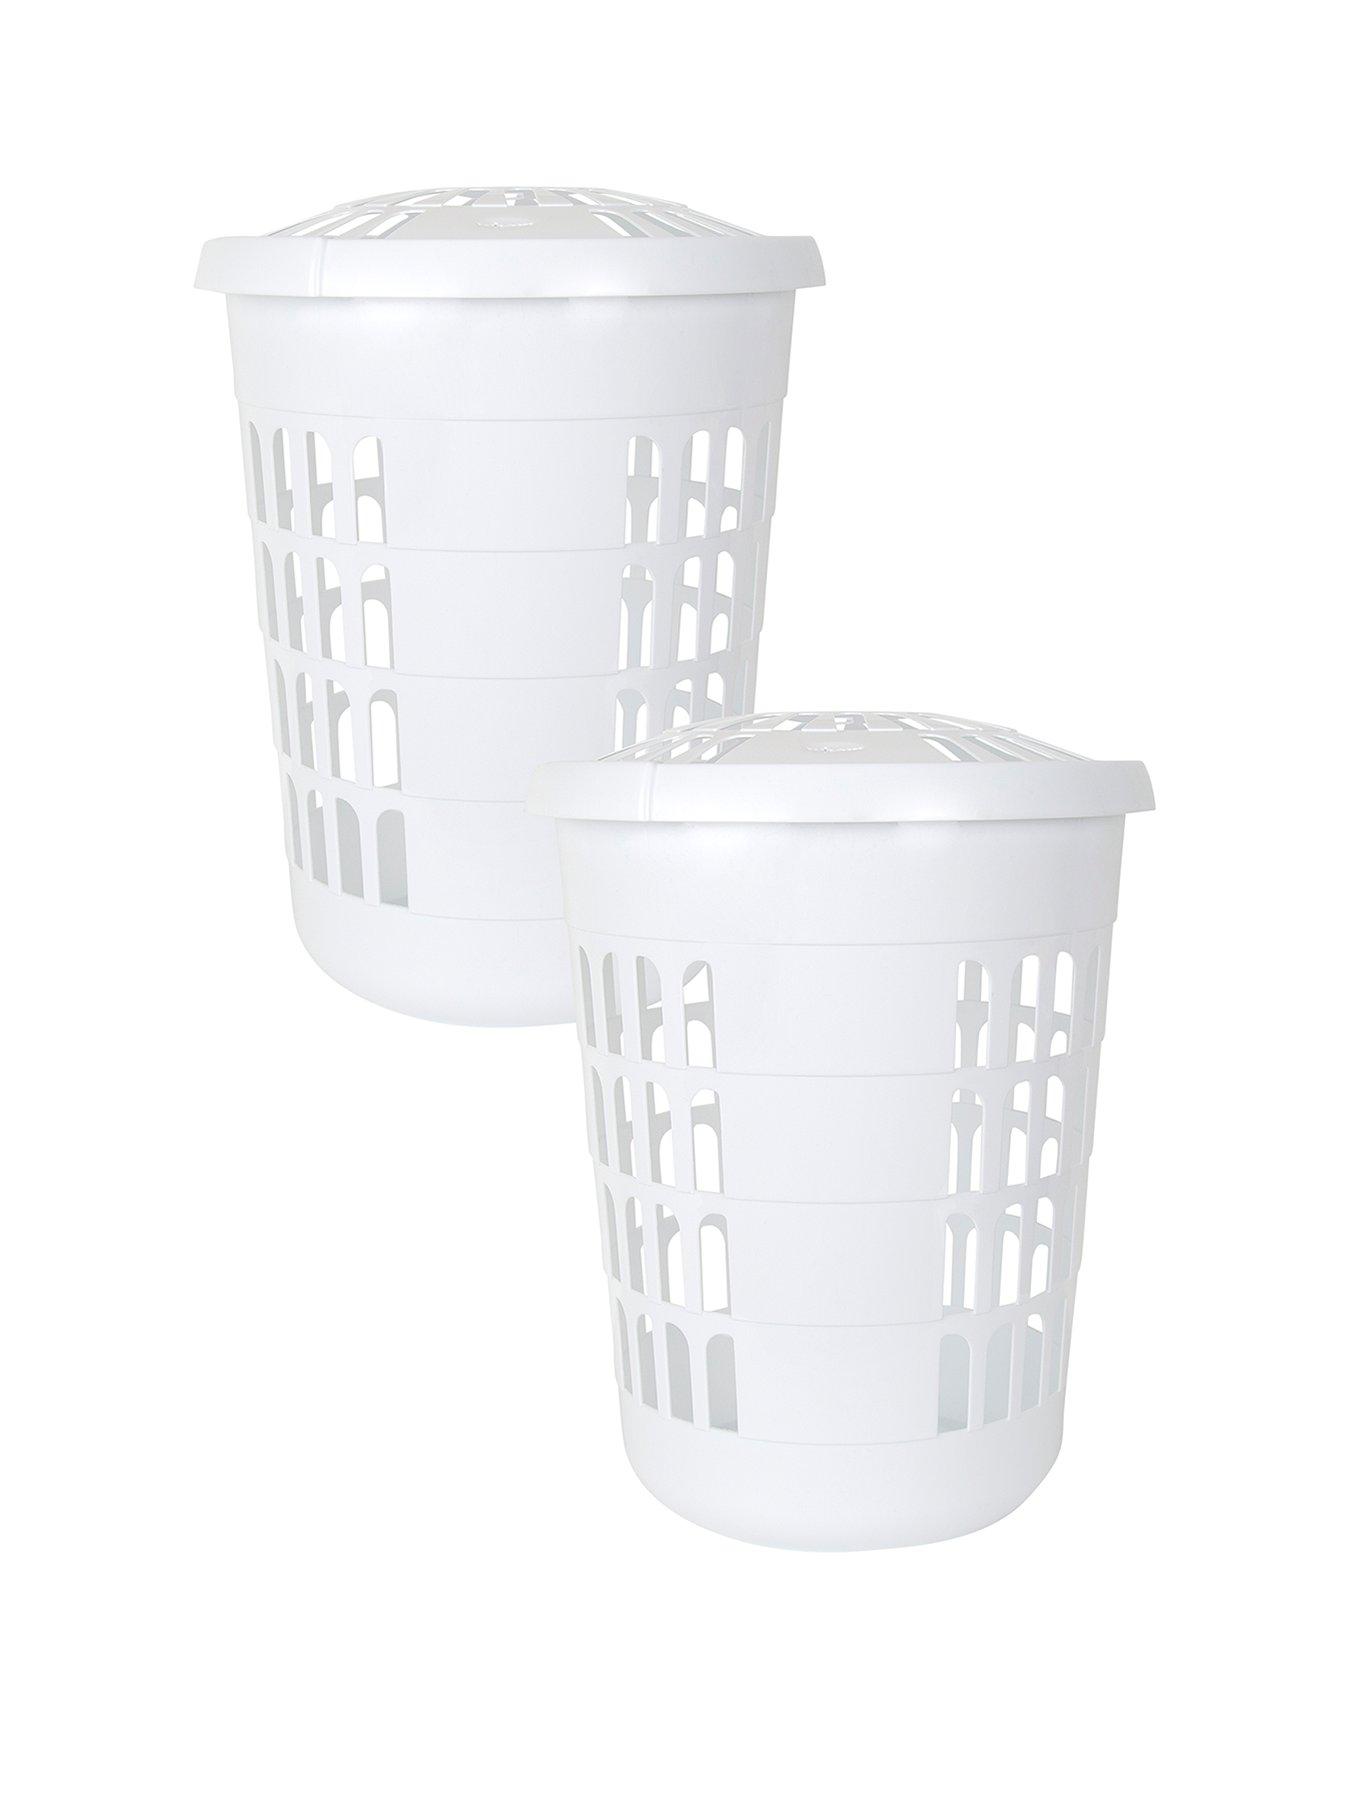 Beige 65L funky gadgets Deluxe Round Plastic Laundry Basket Hamper 60L Washing Clothes Linen Storage Bin Large Bins With Lid